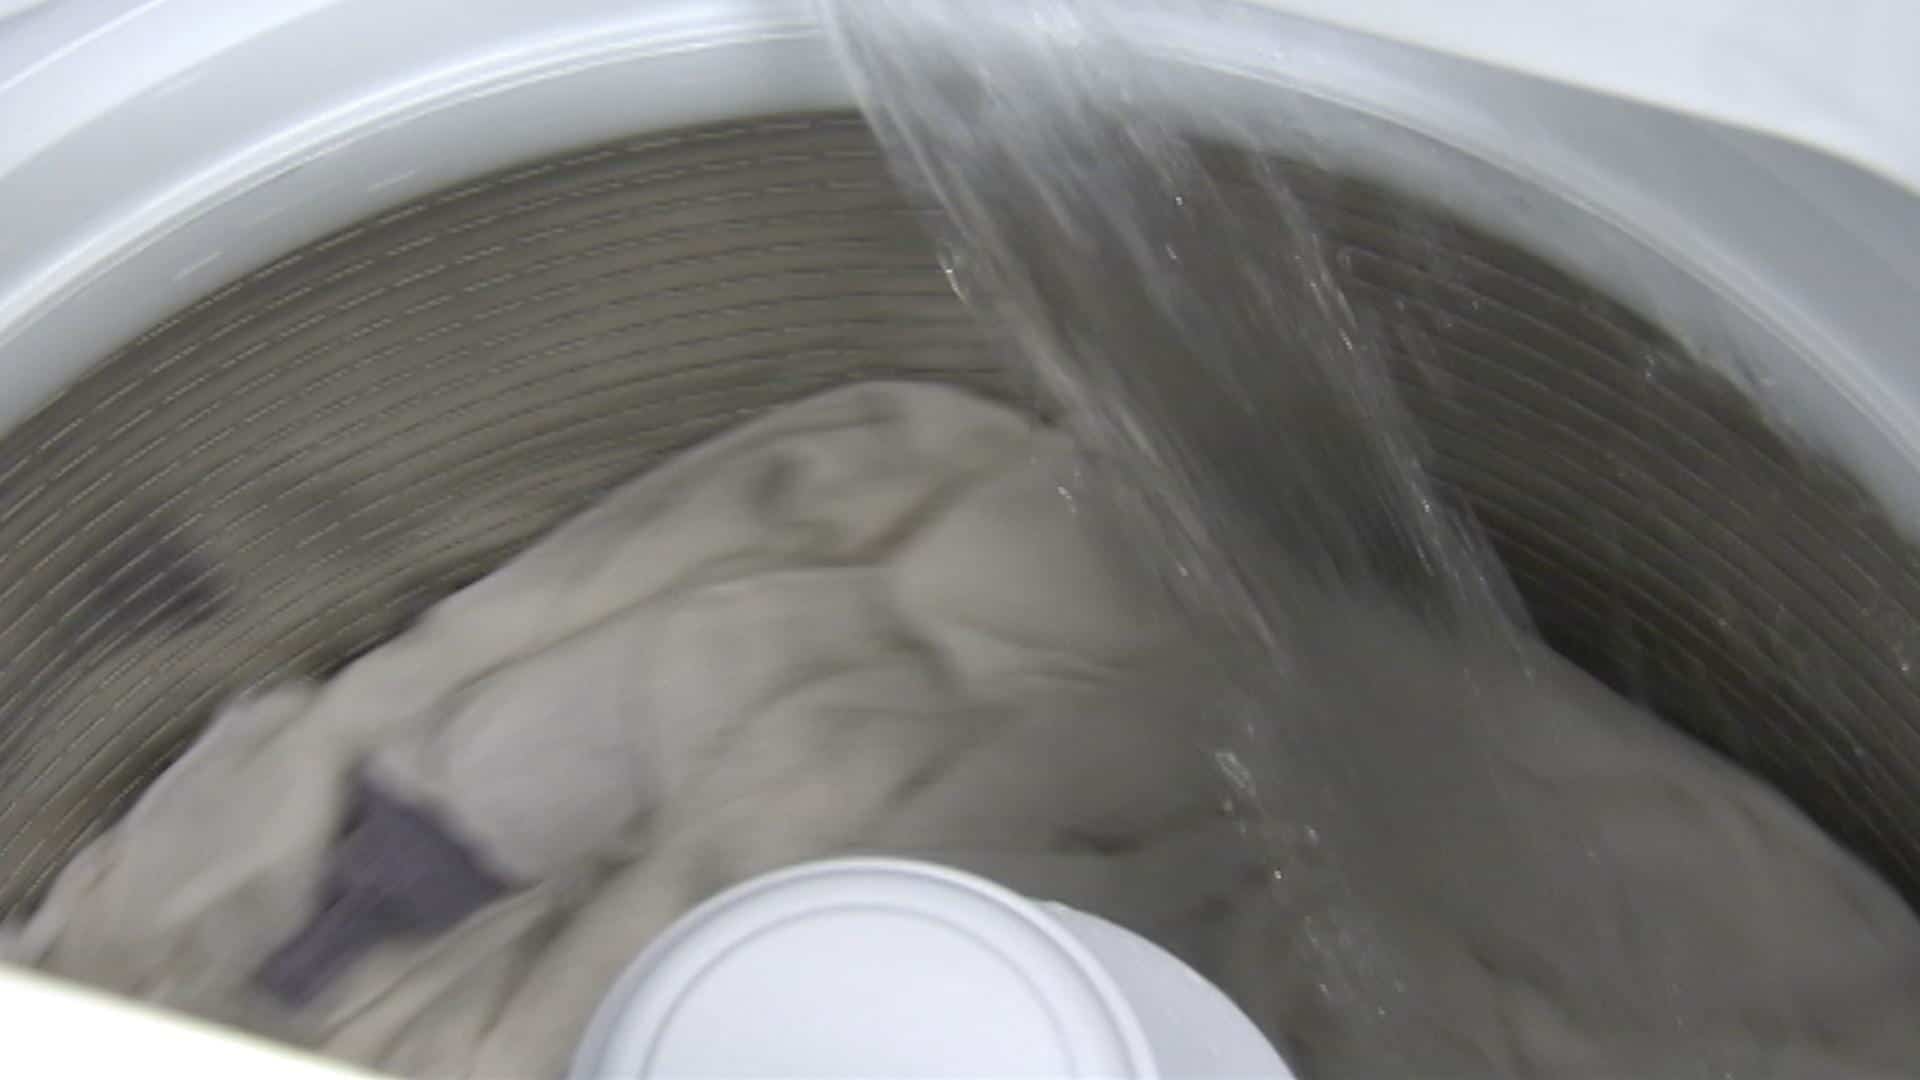 Don't Bother Using Hot Water to Wash Your Laundry